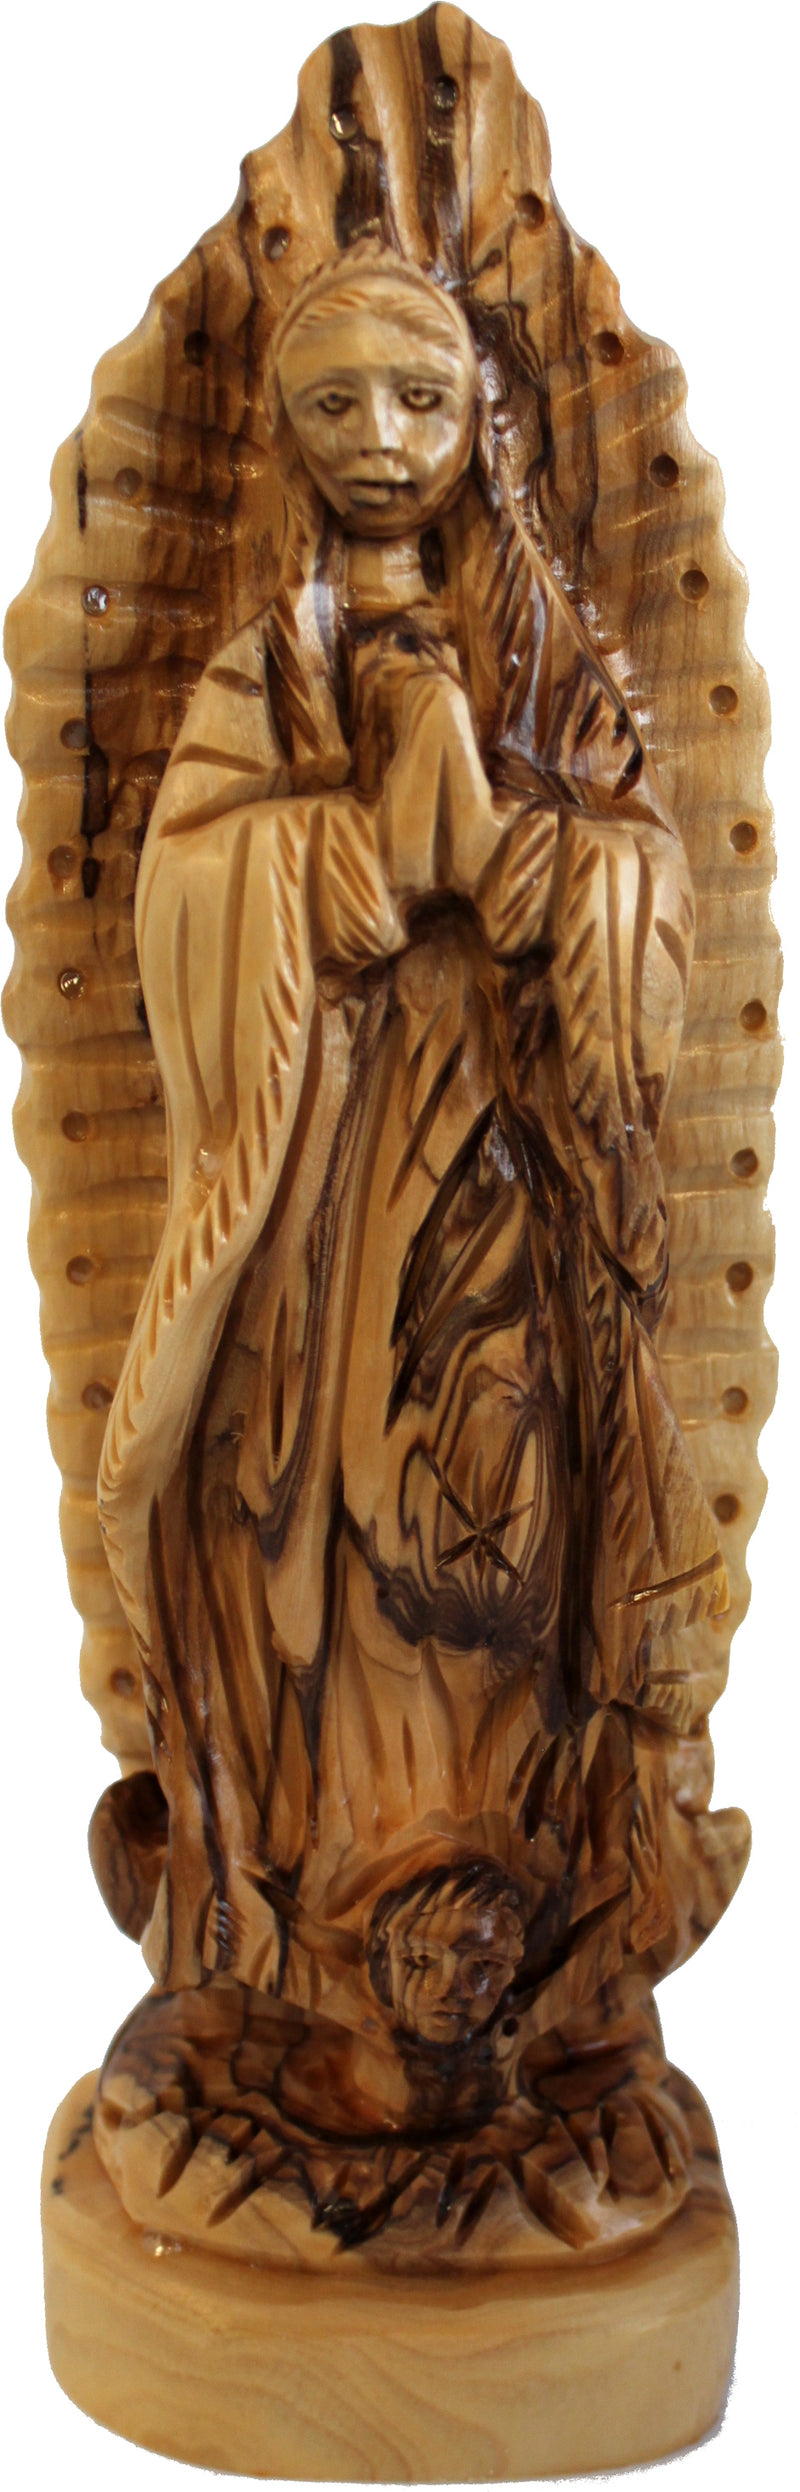 Holy Land Market Virgin or Lady of Guadalupe Olive Wood Statue from Bethlehem - (24 cm cm or 9.25 inches)